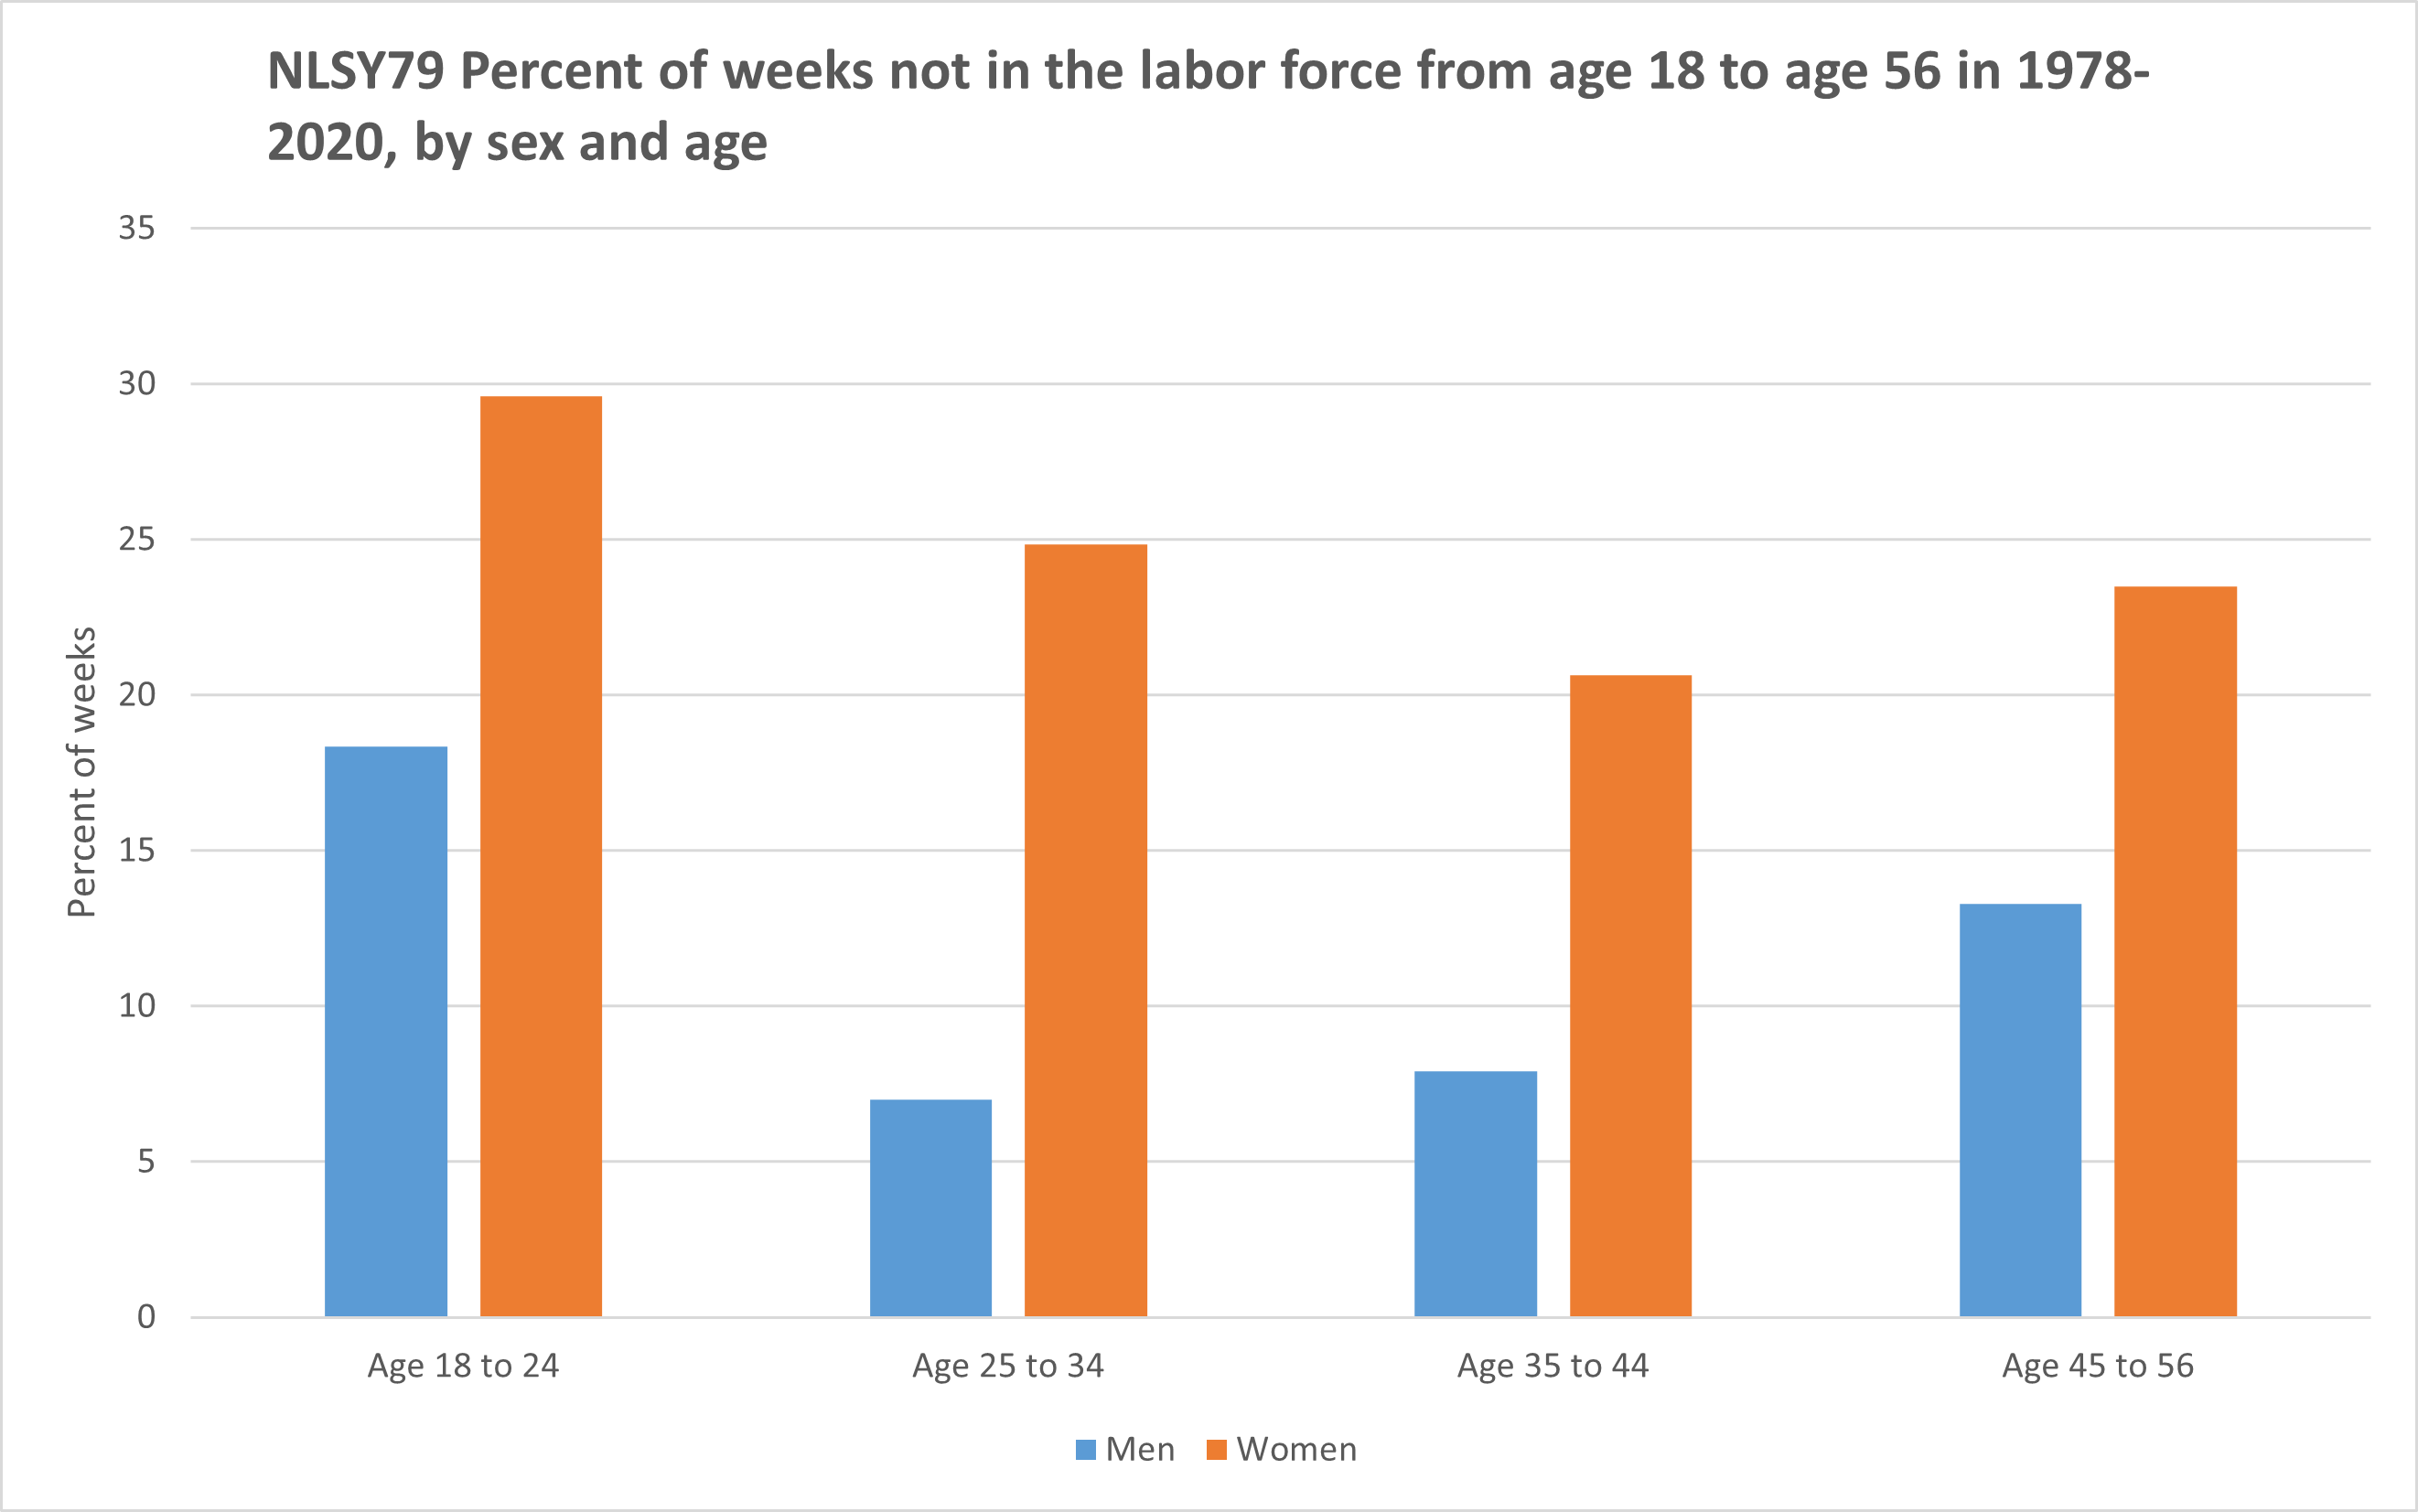 nlsy79-percent-not-in-labor-force-ages-18-56